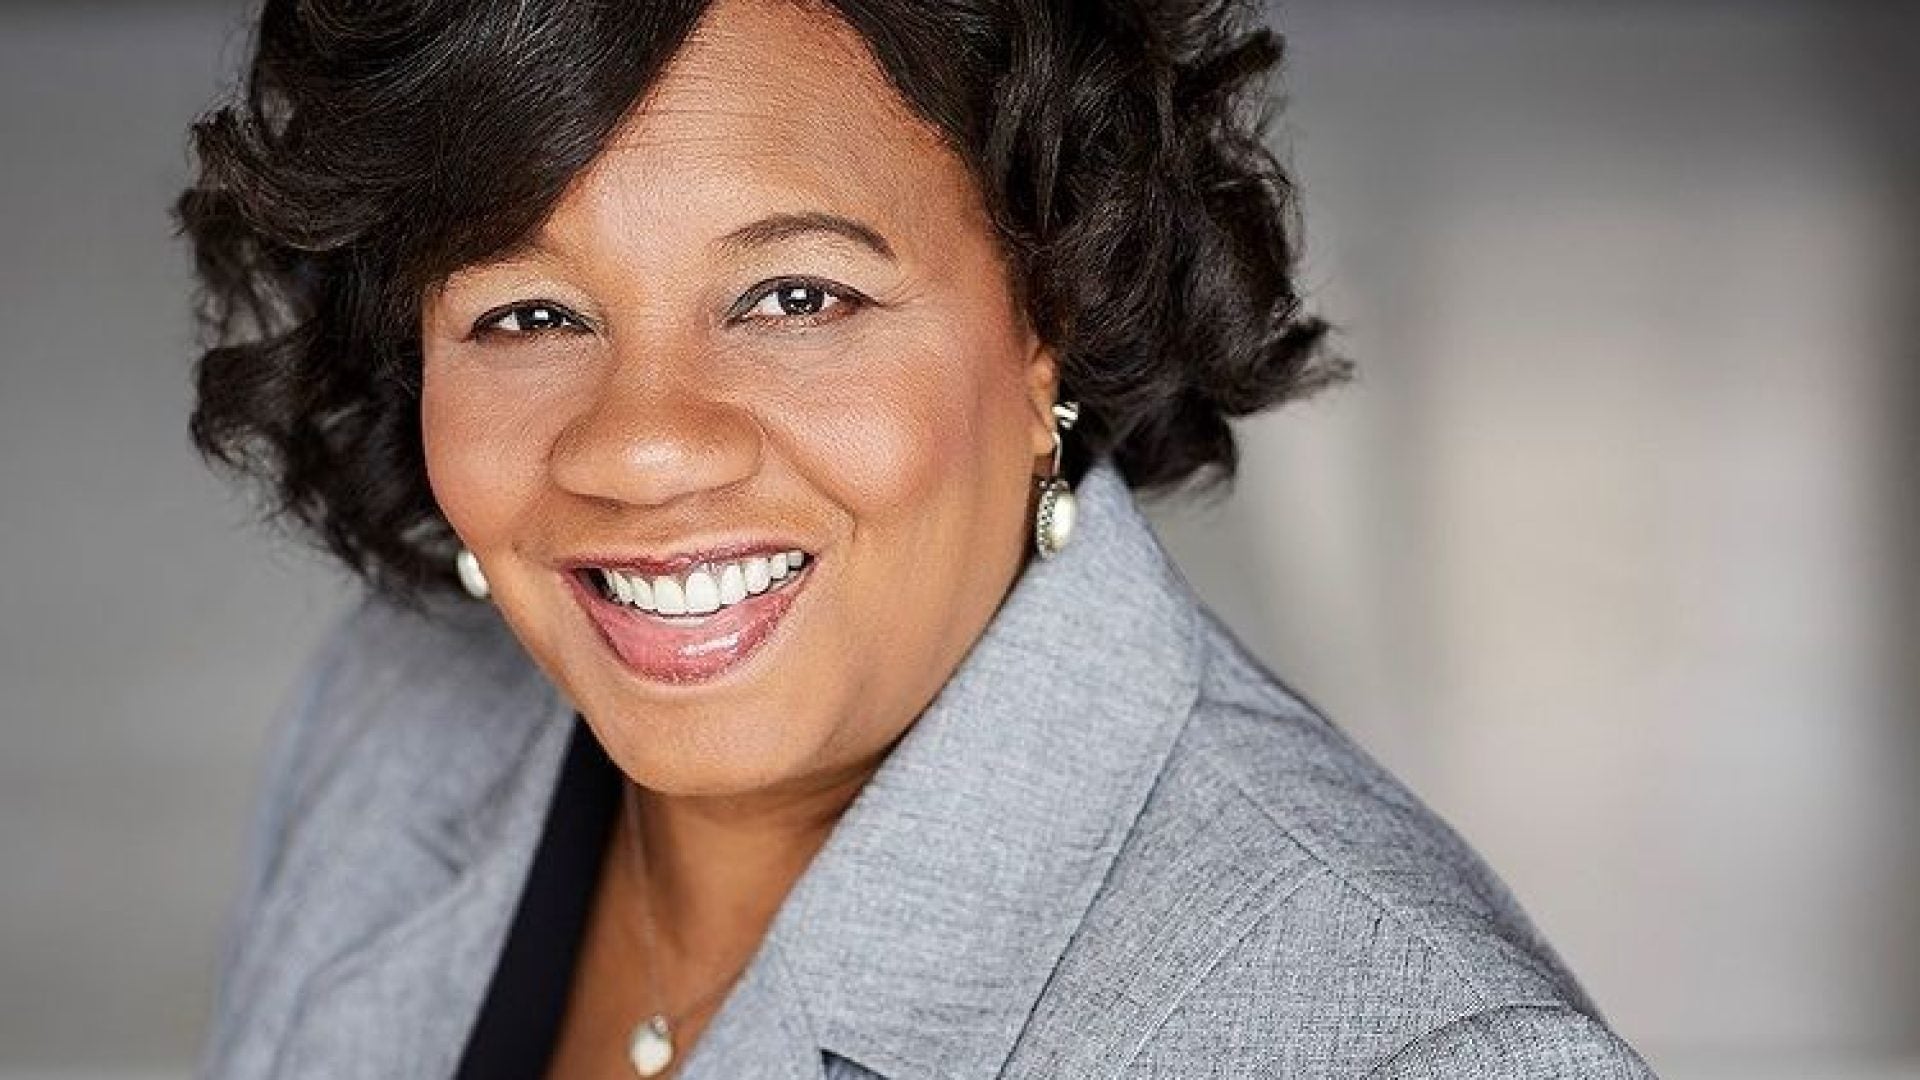 First Black Woman Majority Owner To Grow, Dispense And Process Cannabis In Ohio Announced